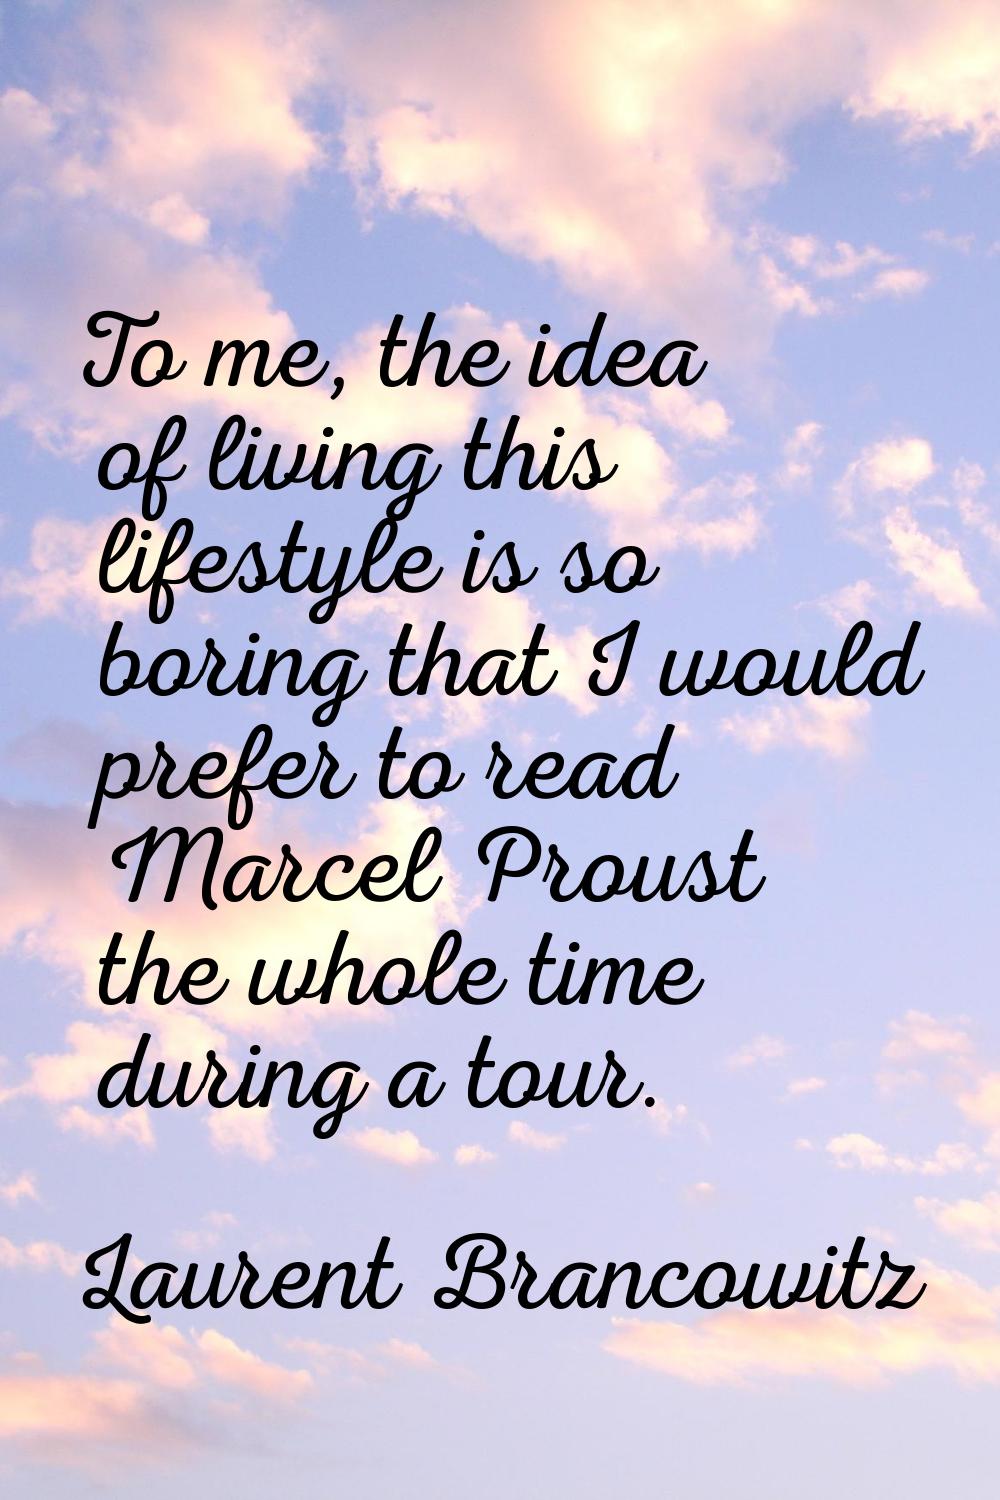 To me, the idea of living this lifestyle is so boring that I would prefer to read Marcel Proust the